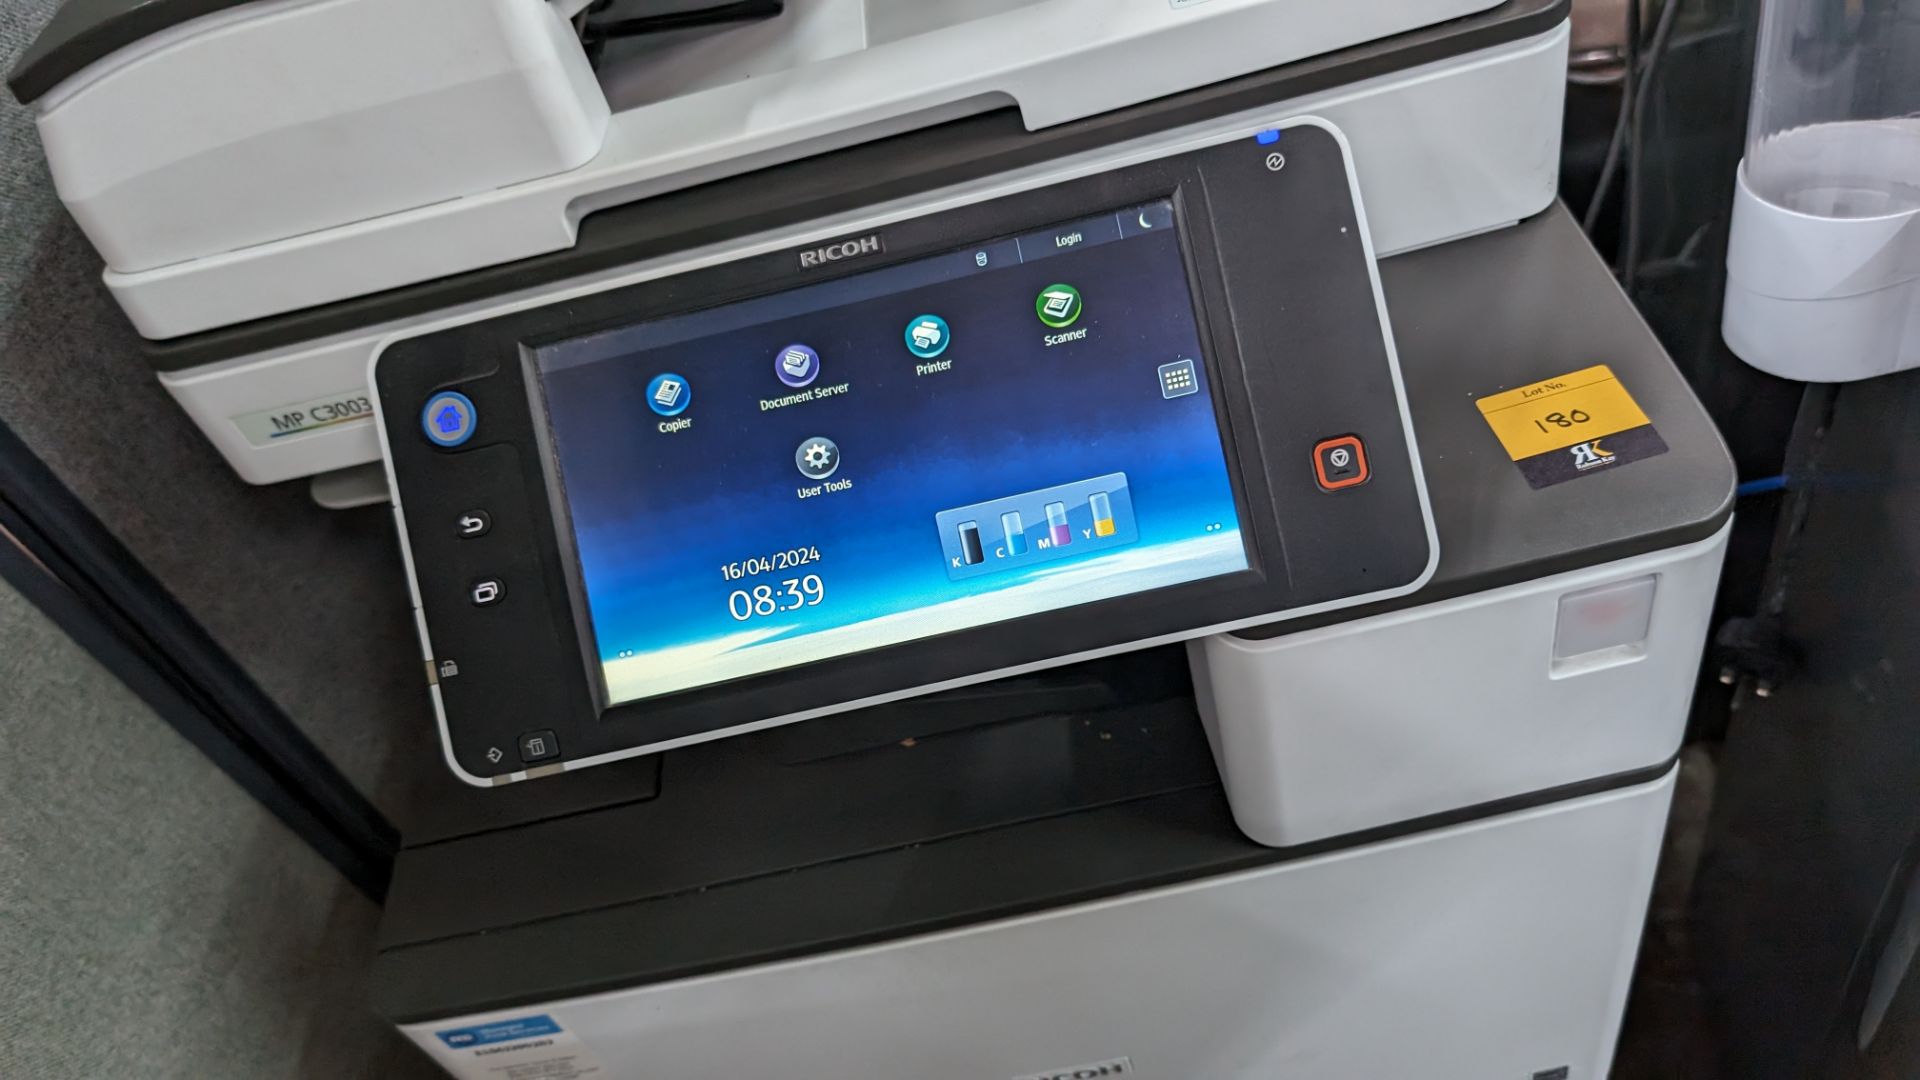 Ricoh MP C3003 floor standing copier with touchscreen controls, ADF, twin paper cassettes & more - Image 4 of 18